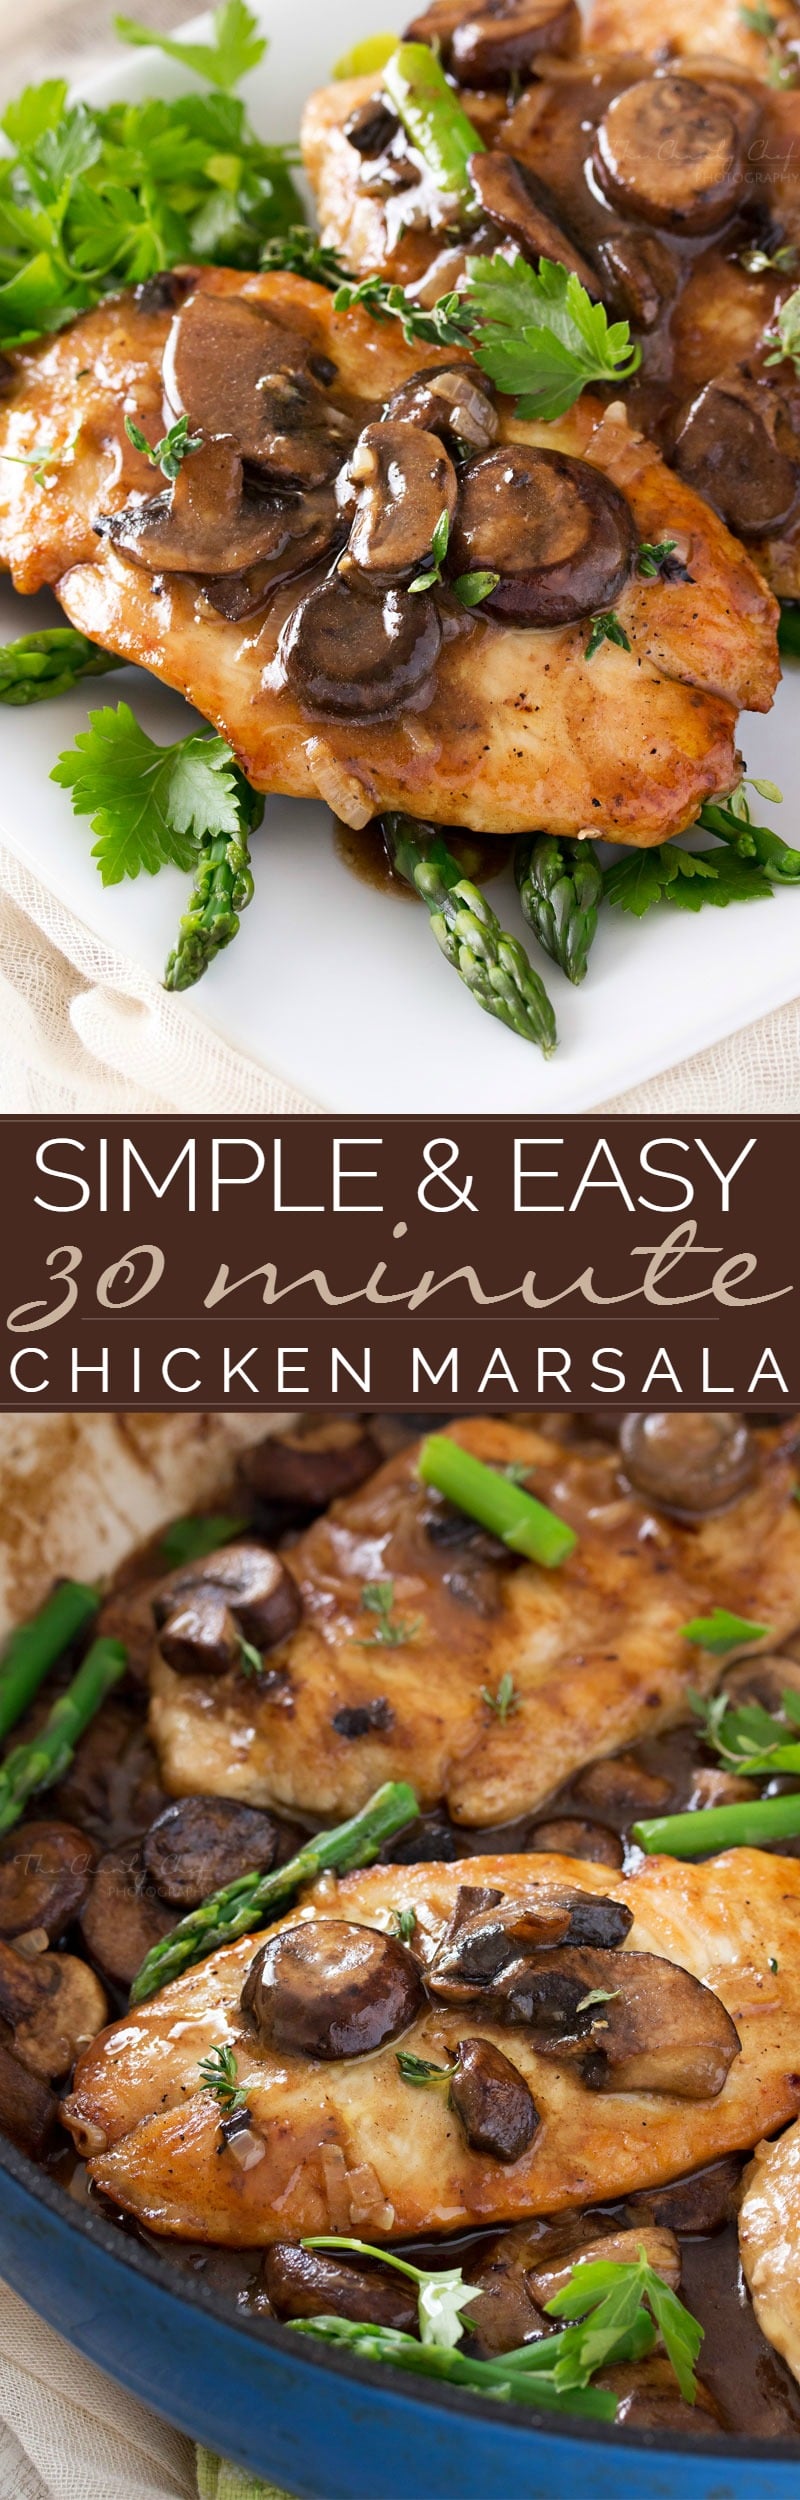 Easy Chicken Marsala | This easy chicken Marsala dish takes just 30 minutes to make! Classically savory and flavorful, this is one dish you'll love to cook time and time again! | http://thechunkychef.com